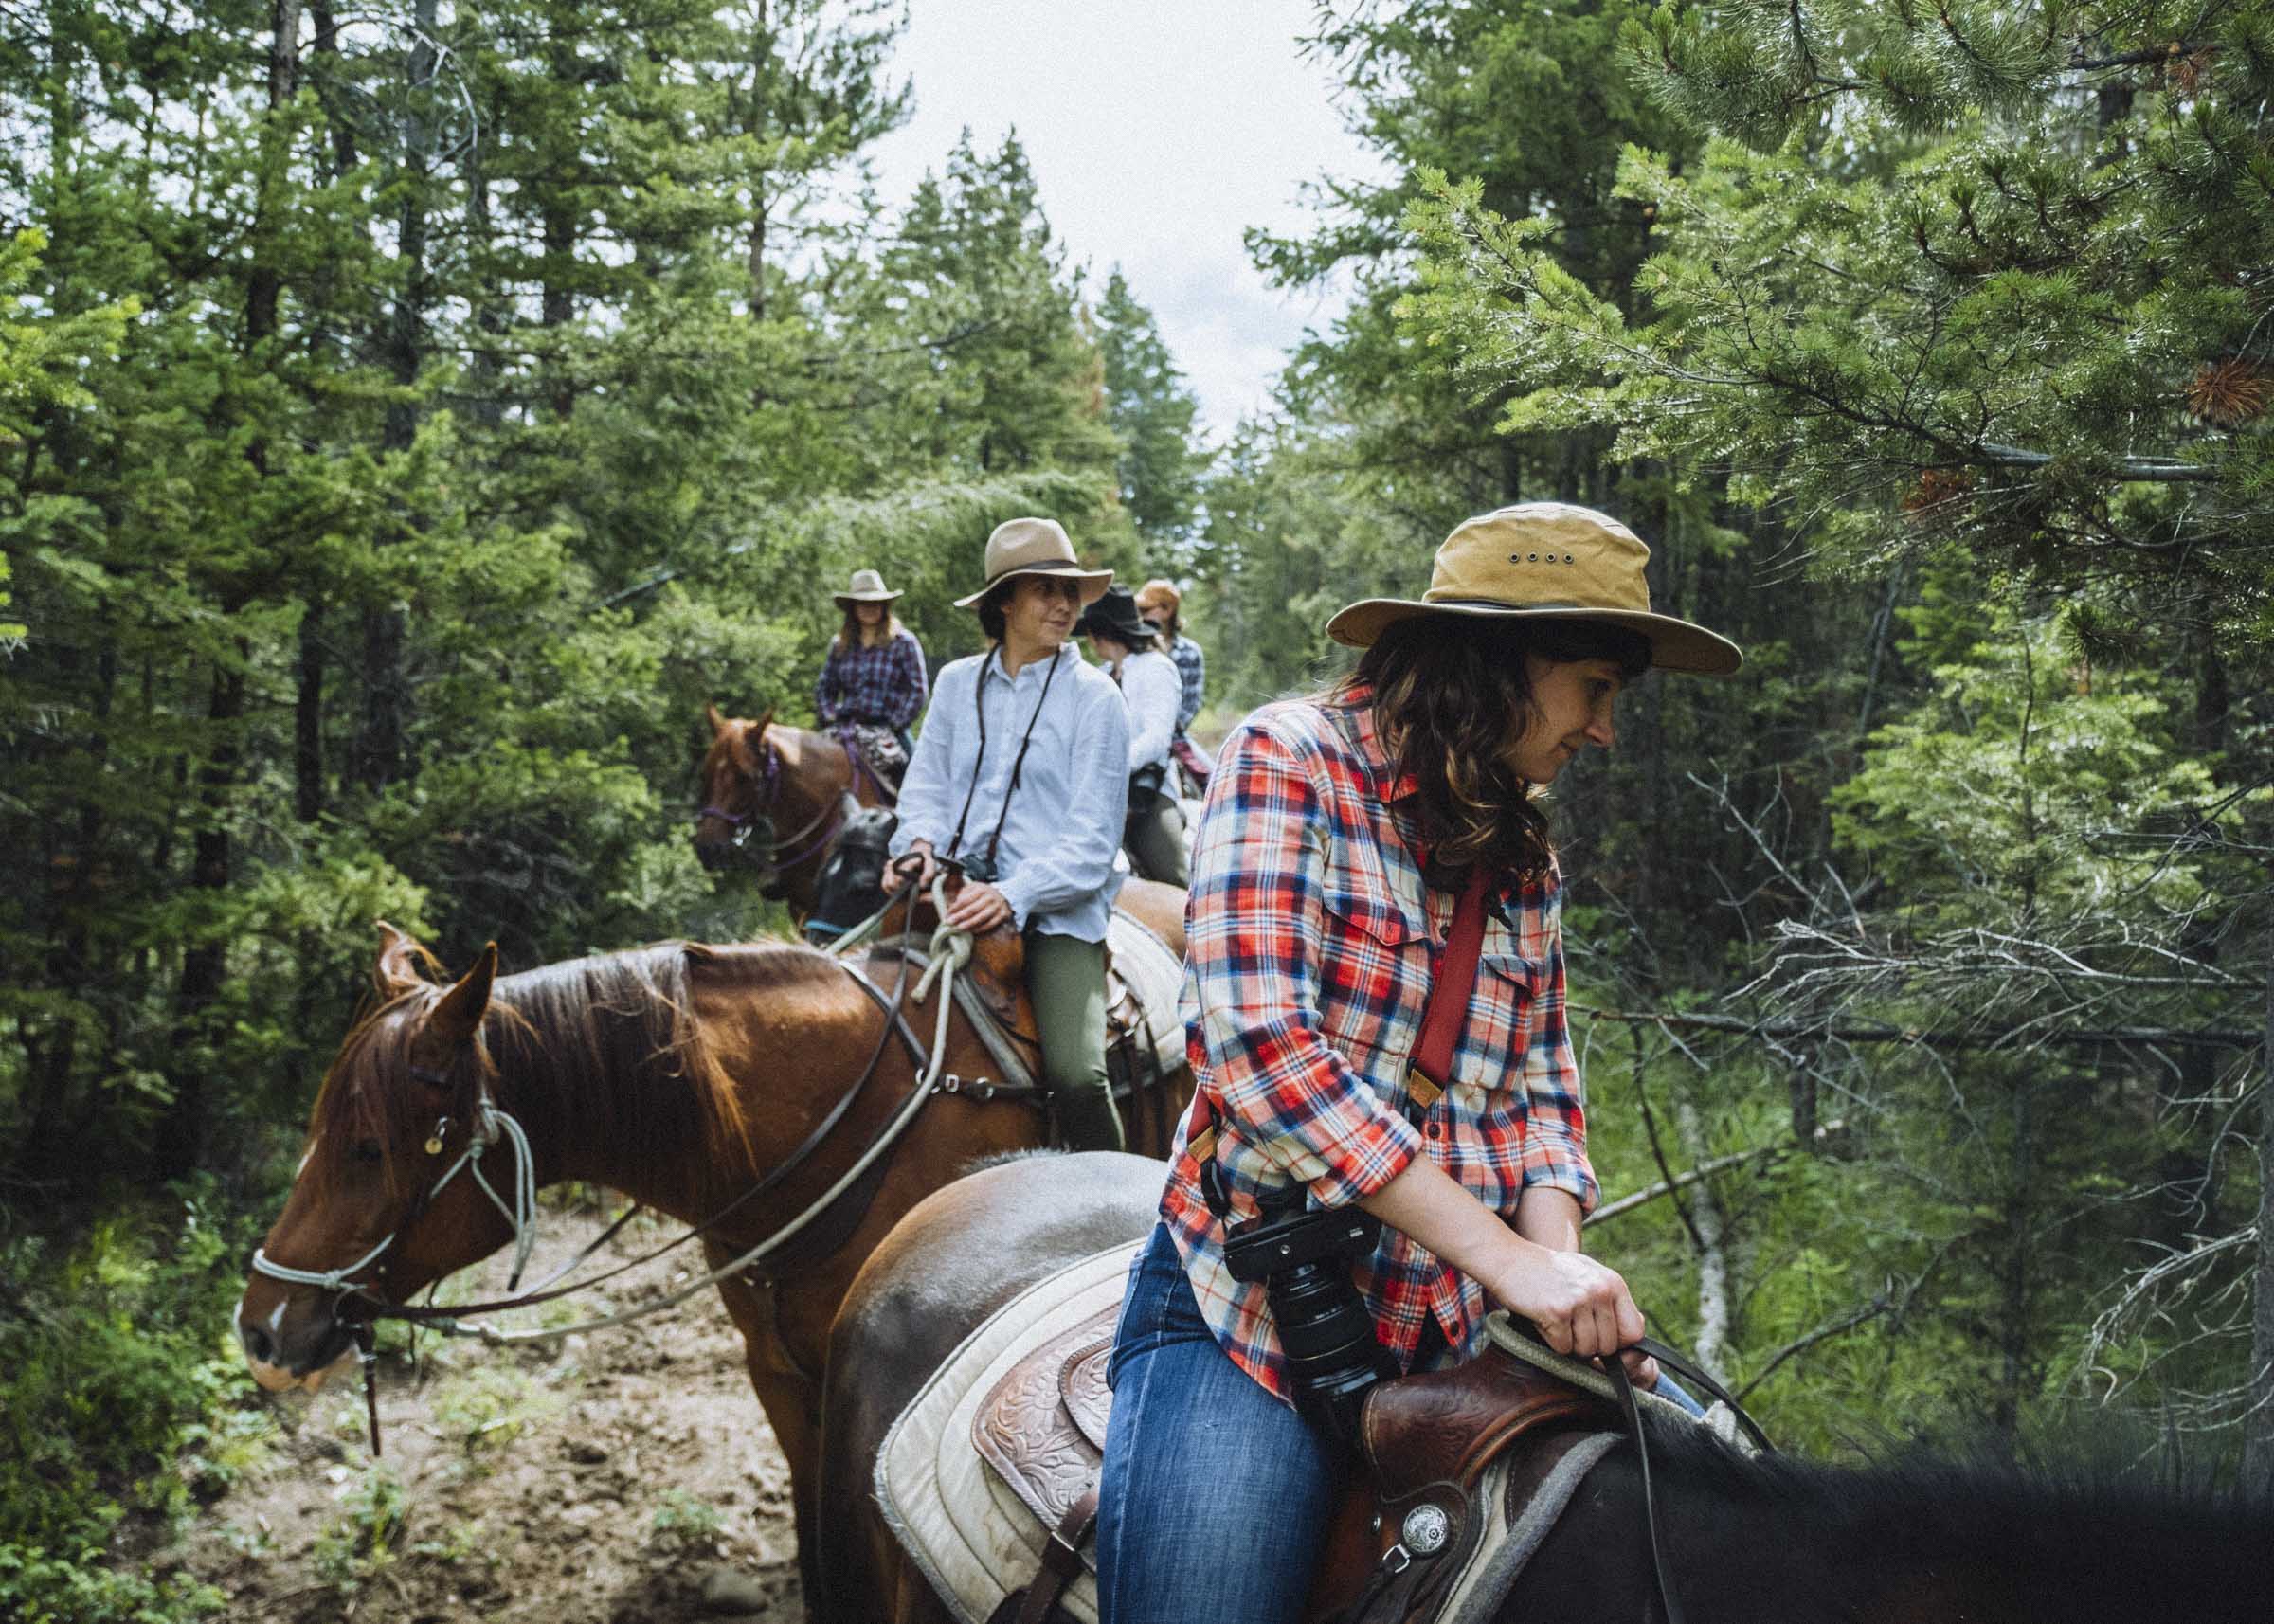 Riding horses through the vast pine forests of the BC interior